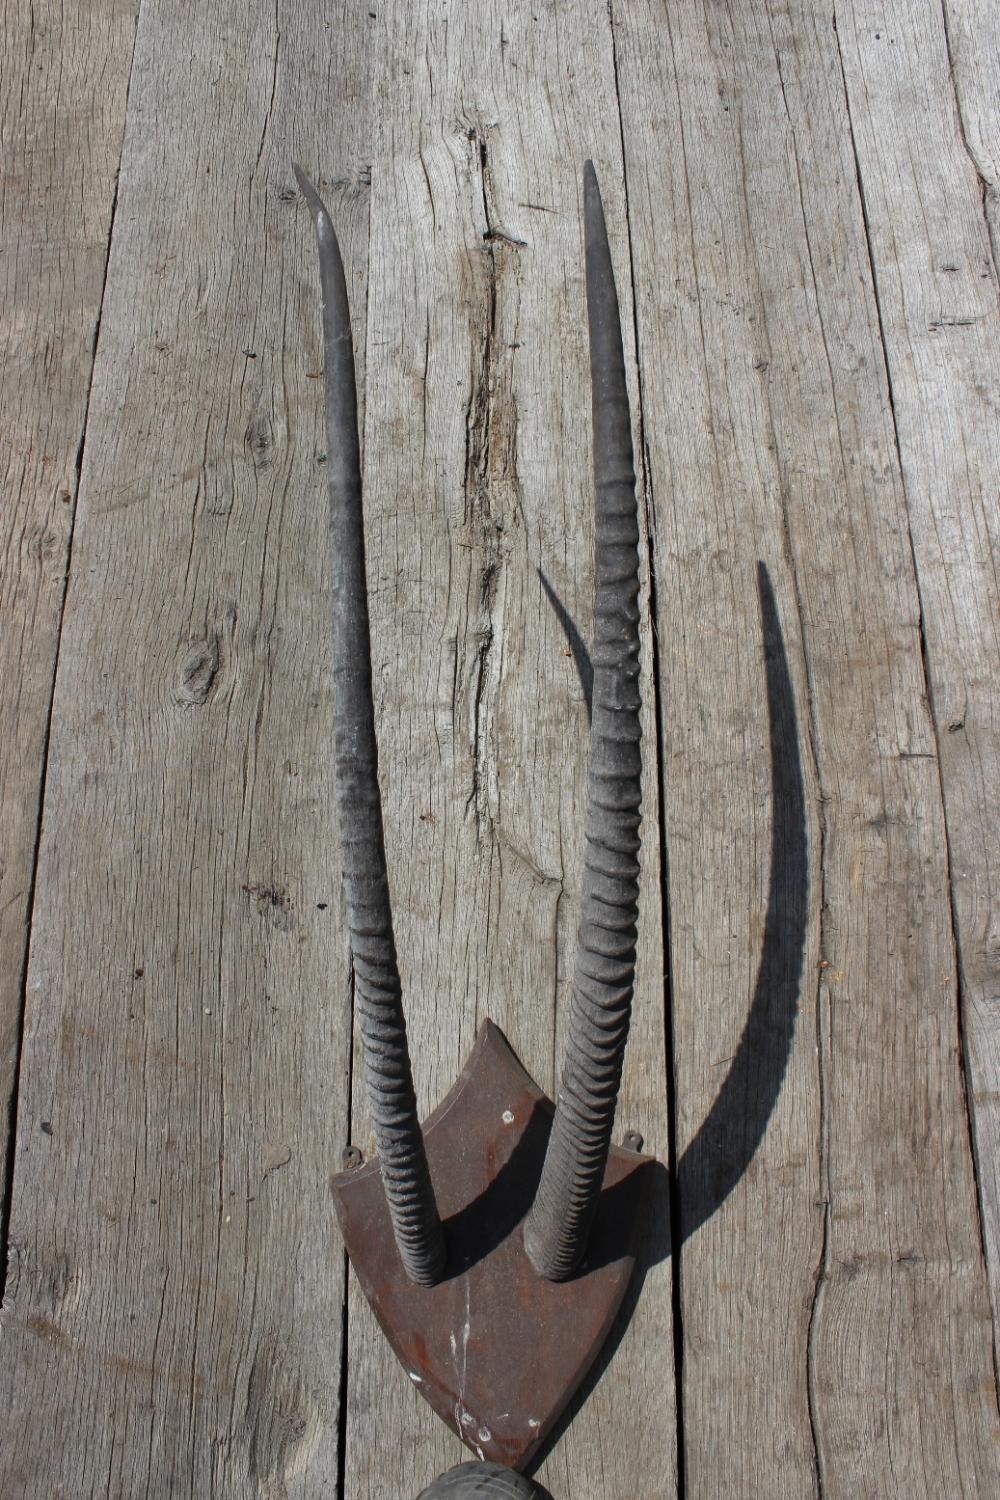 Vintage pair of horns on a wooden backplate, this measures 27cm wide x 37cm high.

Fair condition for its age.